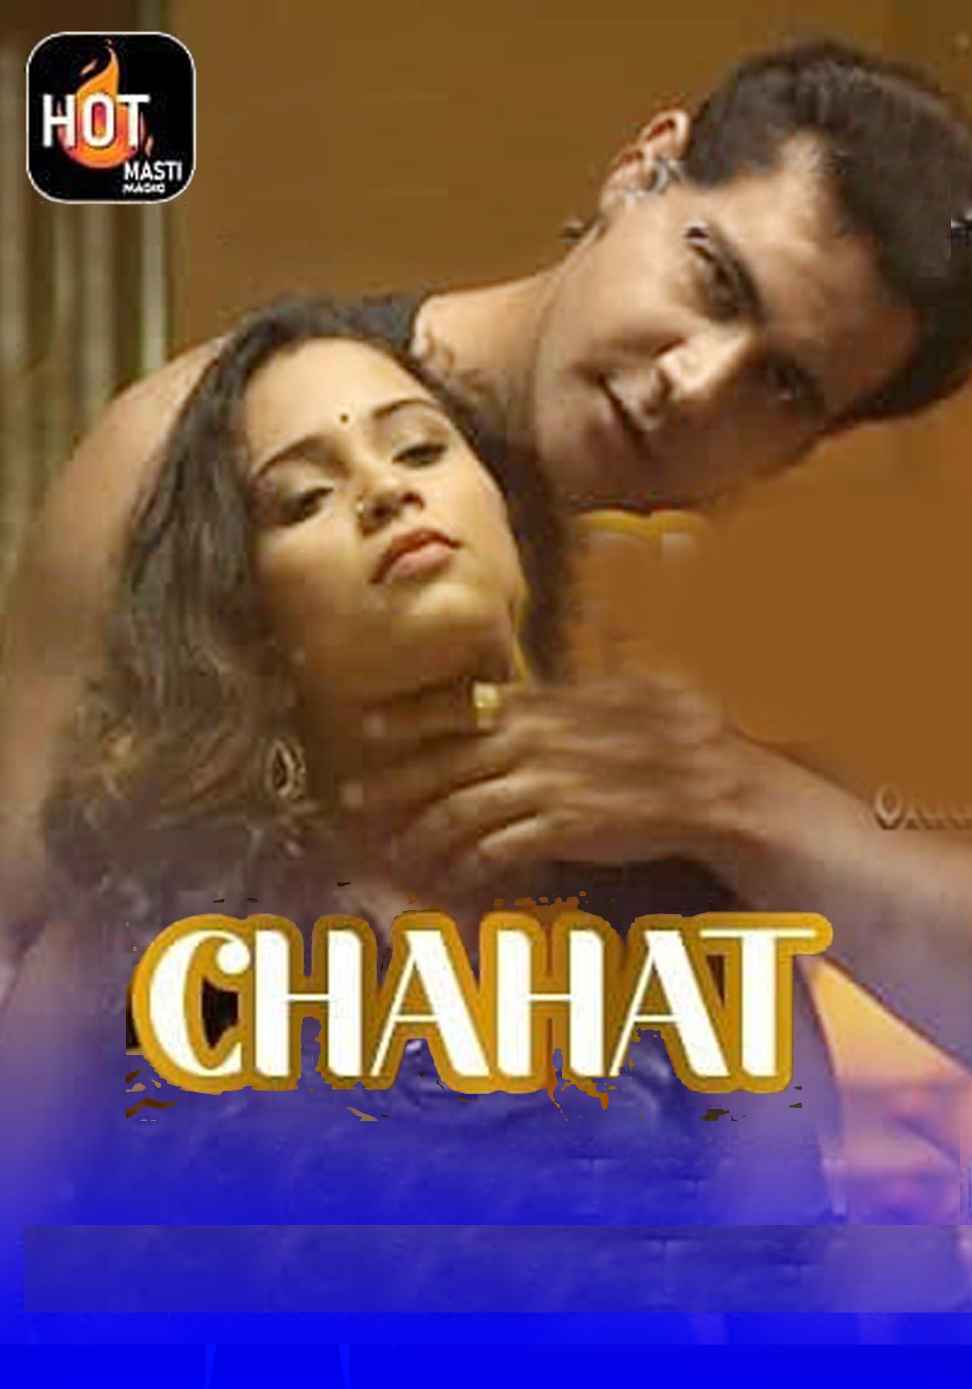 You are currently viewing Chahat 2021 HotMasti Hindi S01E01 Hot Web Series 720p HDRip 150MB Download & Watch Online